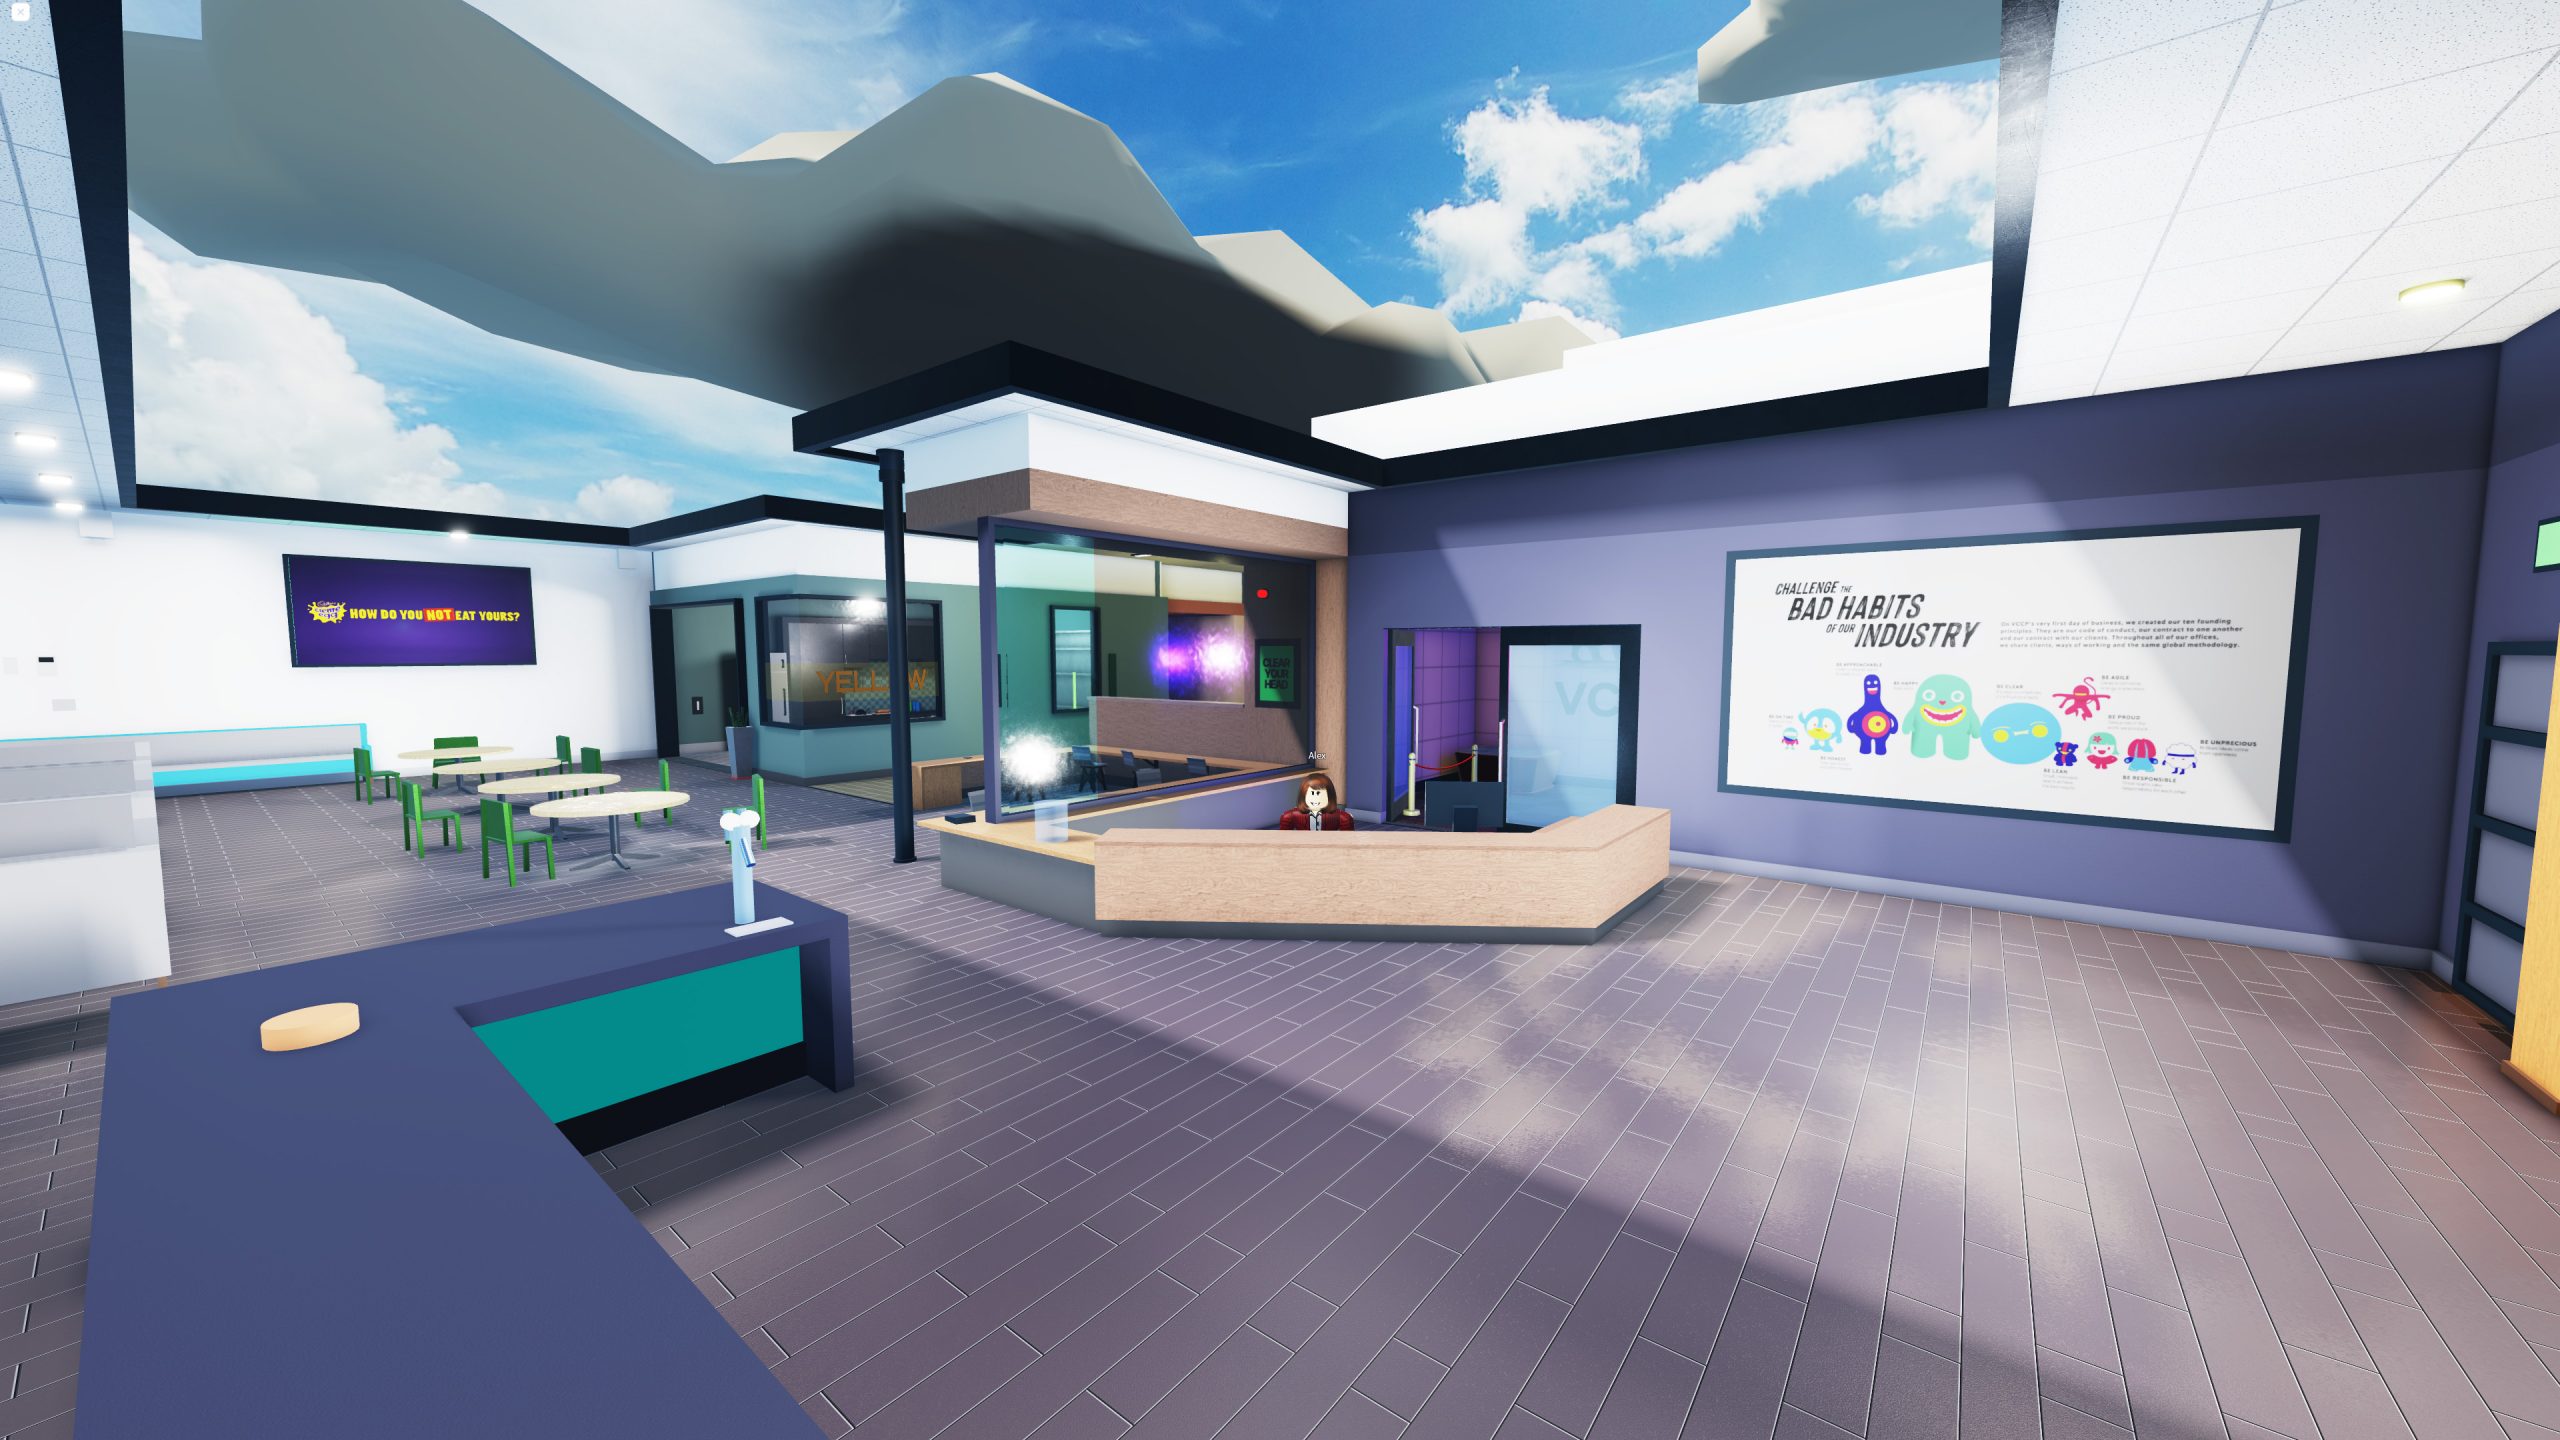 VCCP builds office in Roblox to immerse agency in gaming - VCCP Madrid